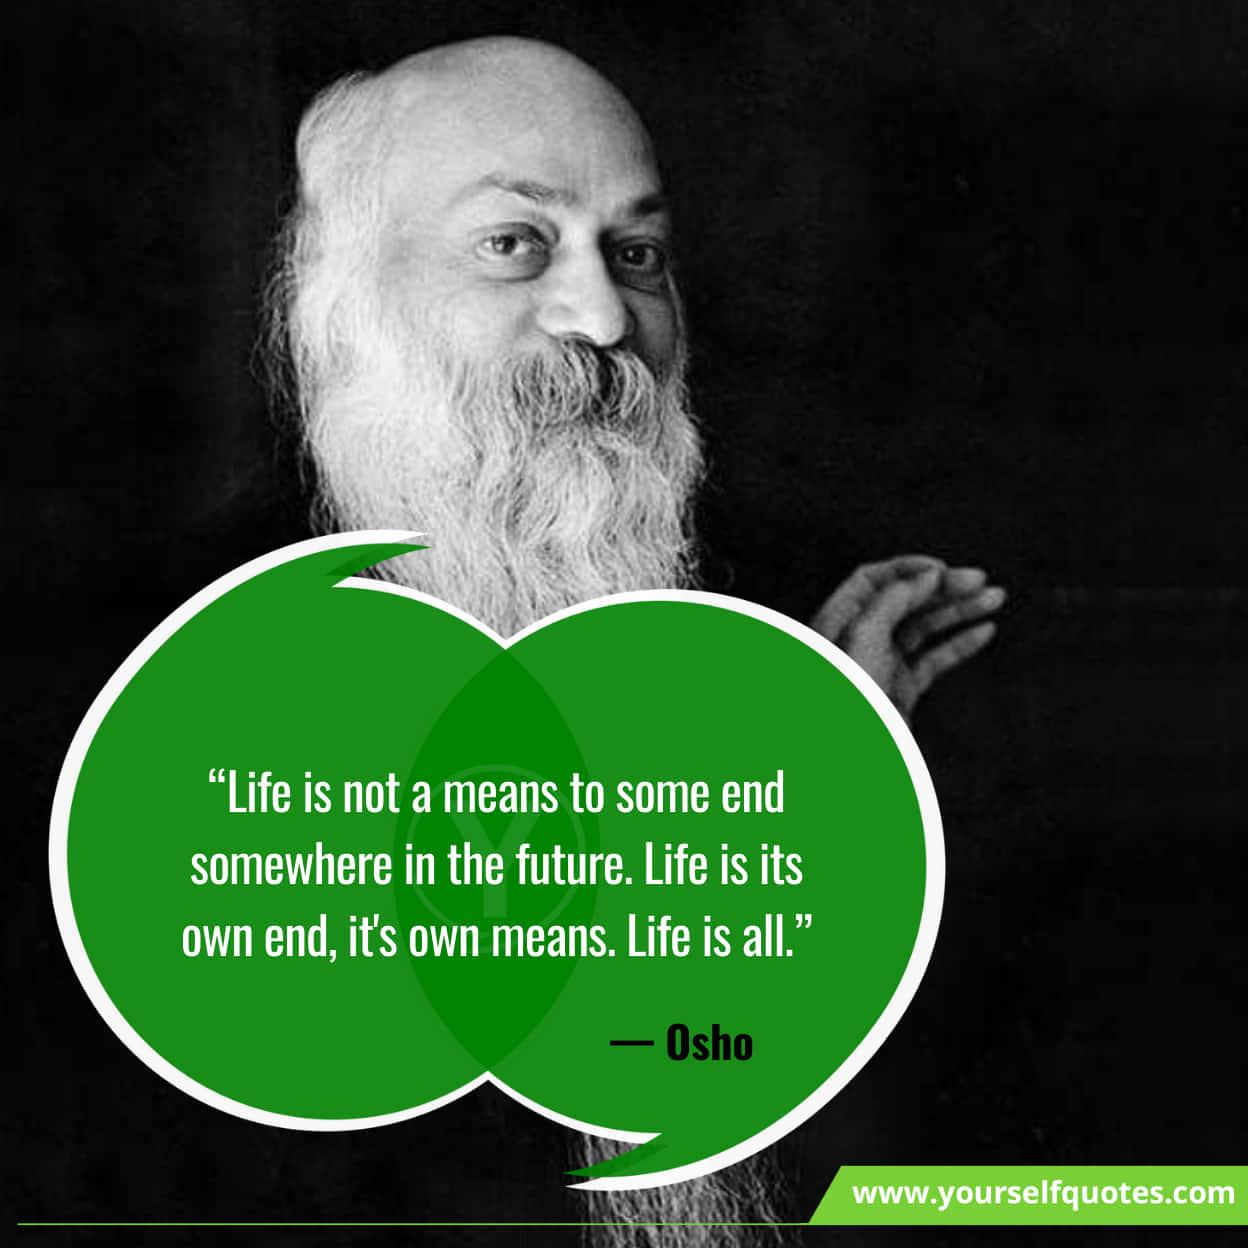 Inspirational Quotes By Osho